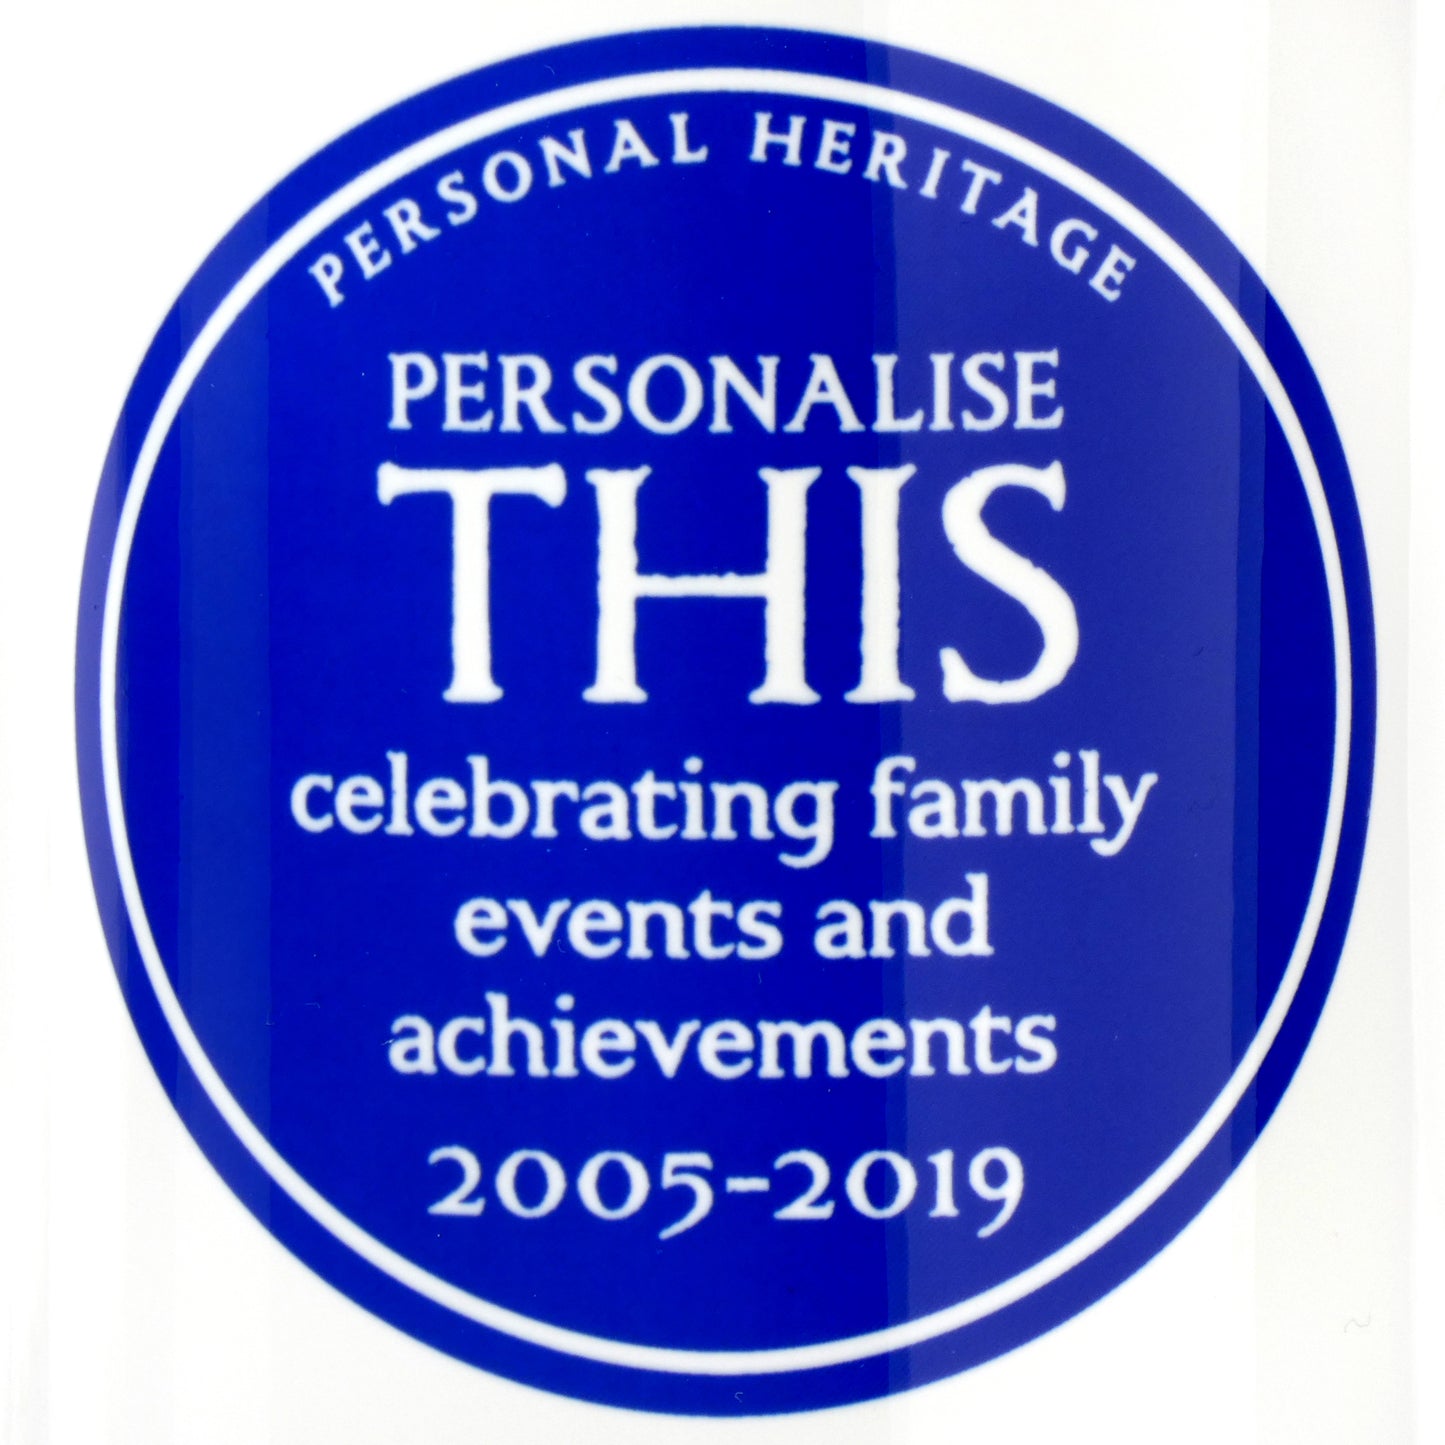 Personalised Heritage Mug. Close-up of blue plaque on white mug. Personalise This celebrating family events and achievements 2005-2019